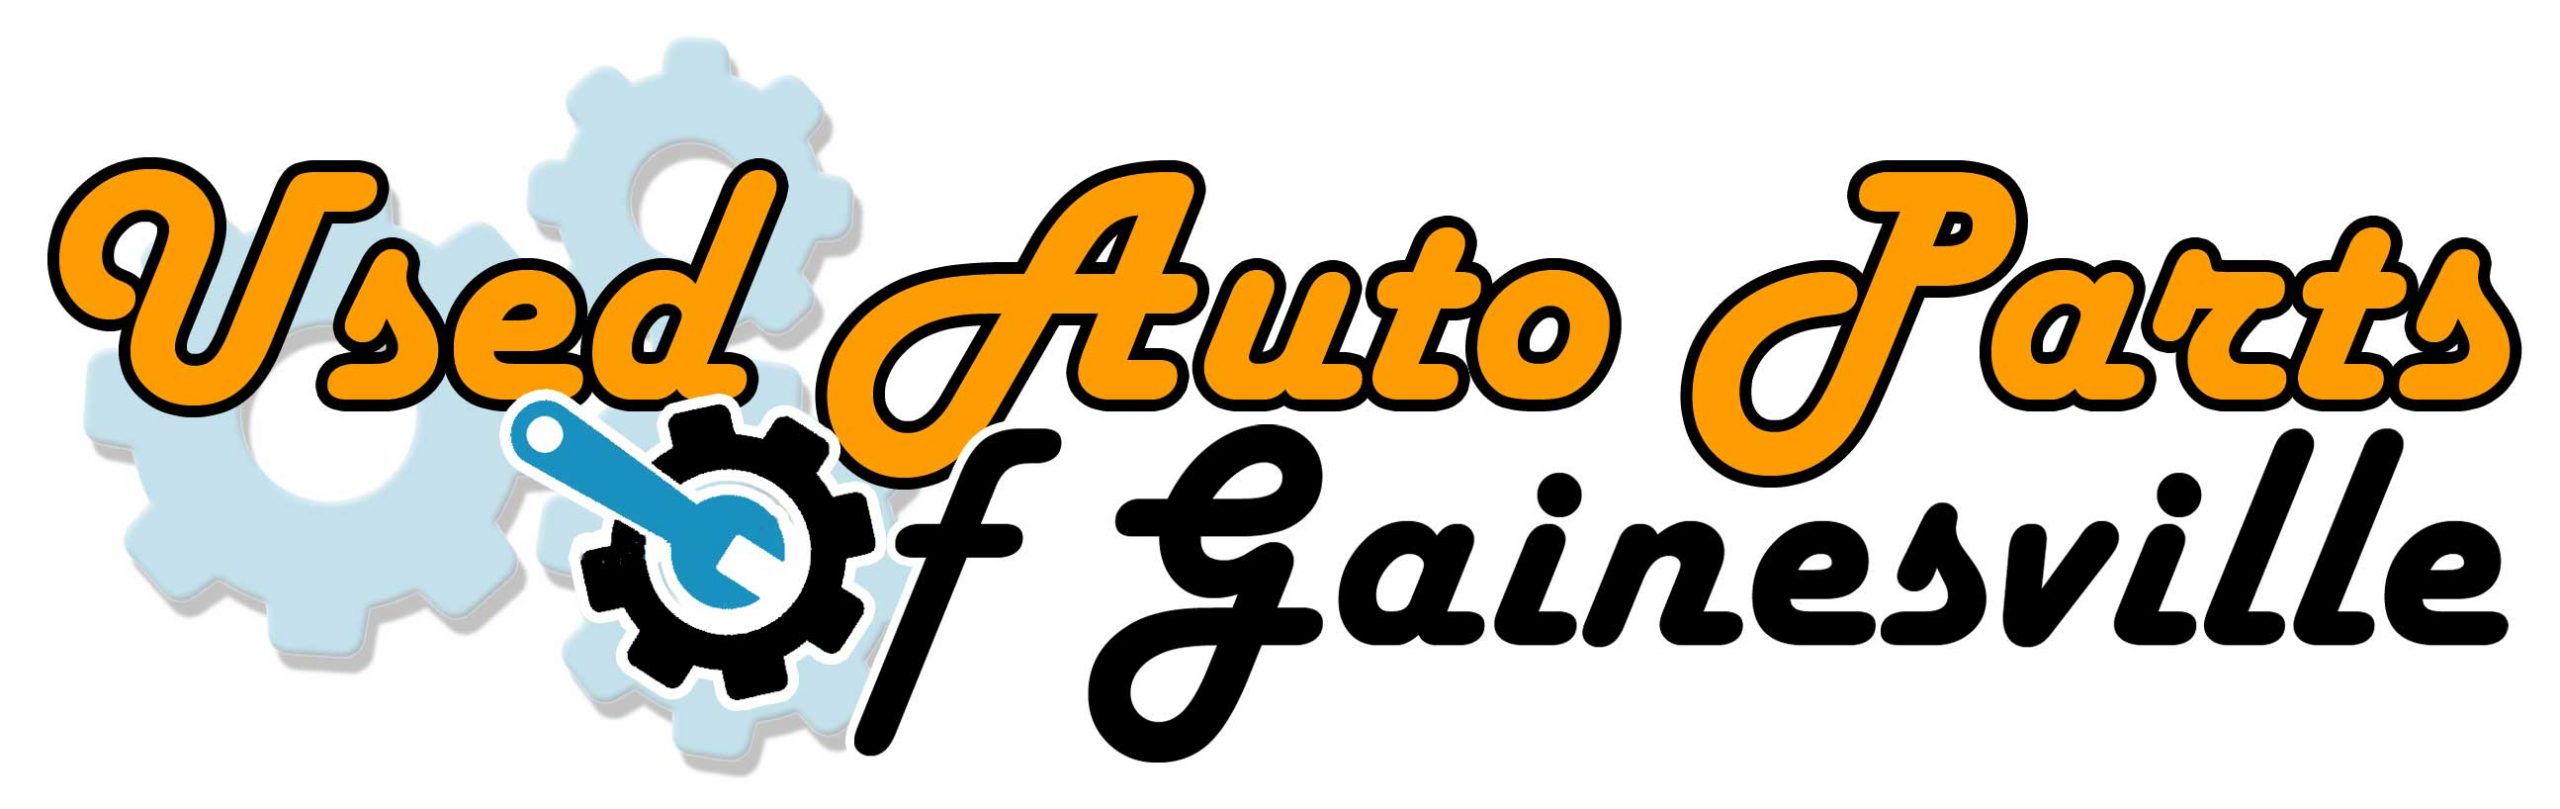 Used Auto Parts of Gainesville